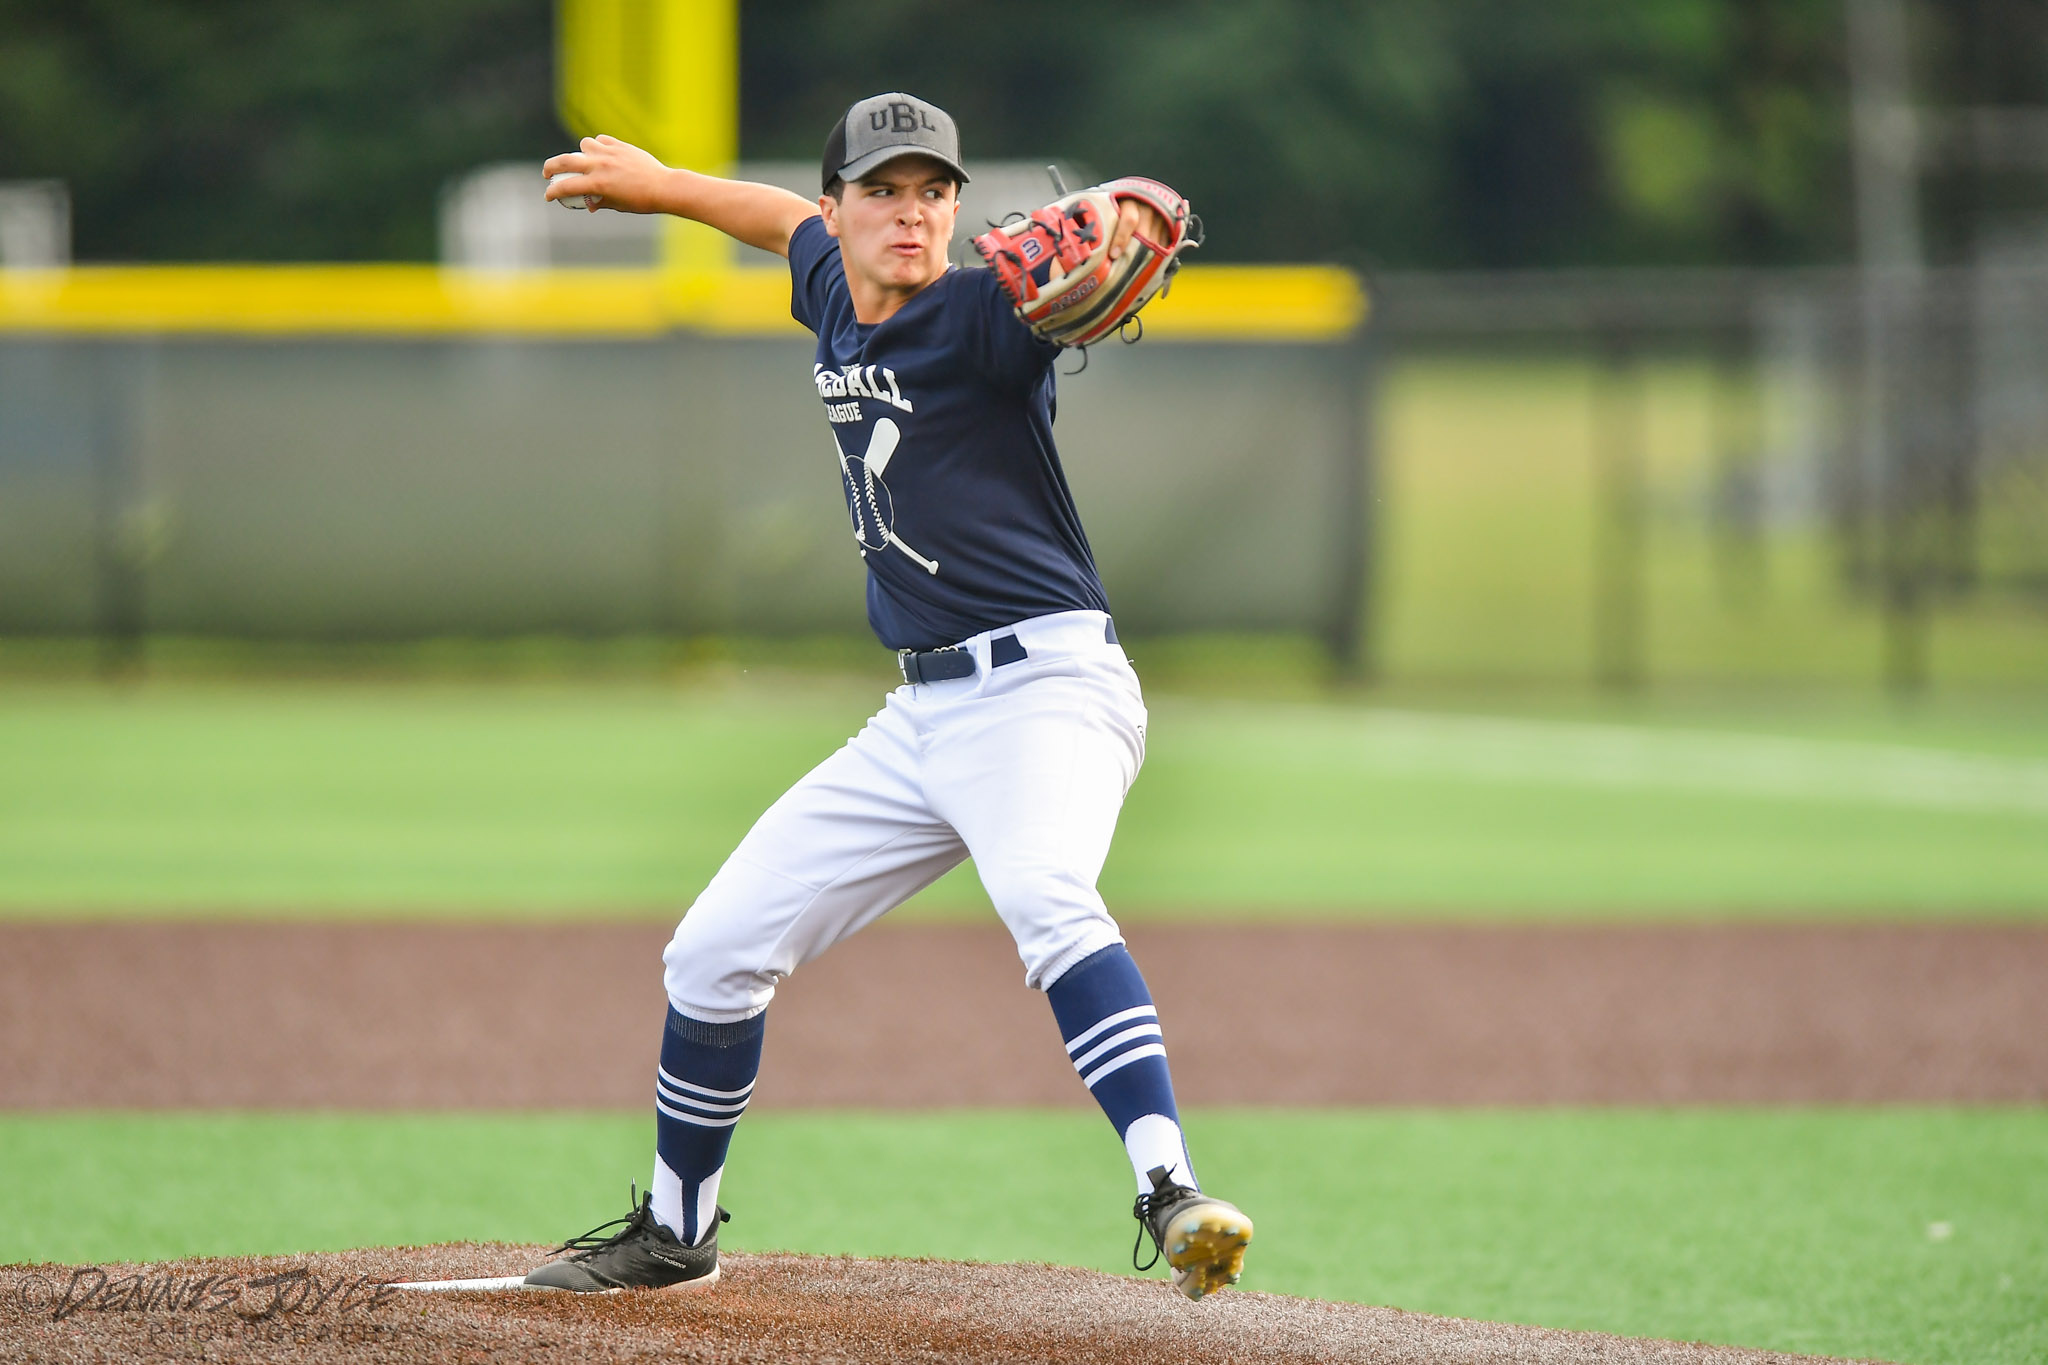 Jacob DiCicco struck out six and hurled a 3-hitter as the Bombers defeated the Bucs, 7-0 in the 2022 Upstate Baseball League (UBL) championship game Monday night at Greece Olympia. (Photo: Dennis JOYCE)